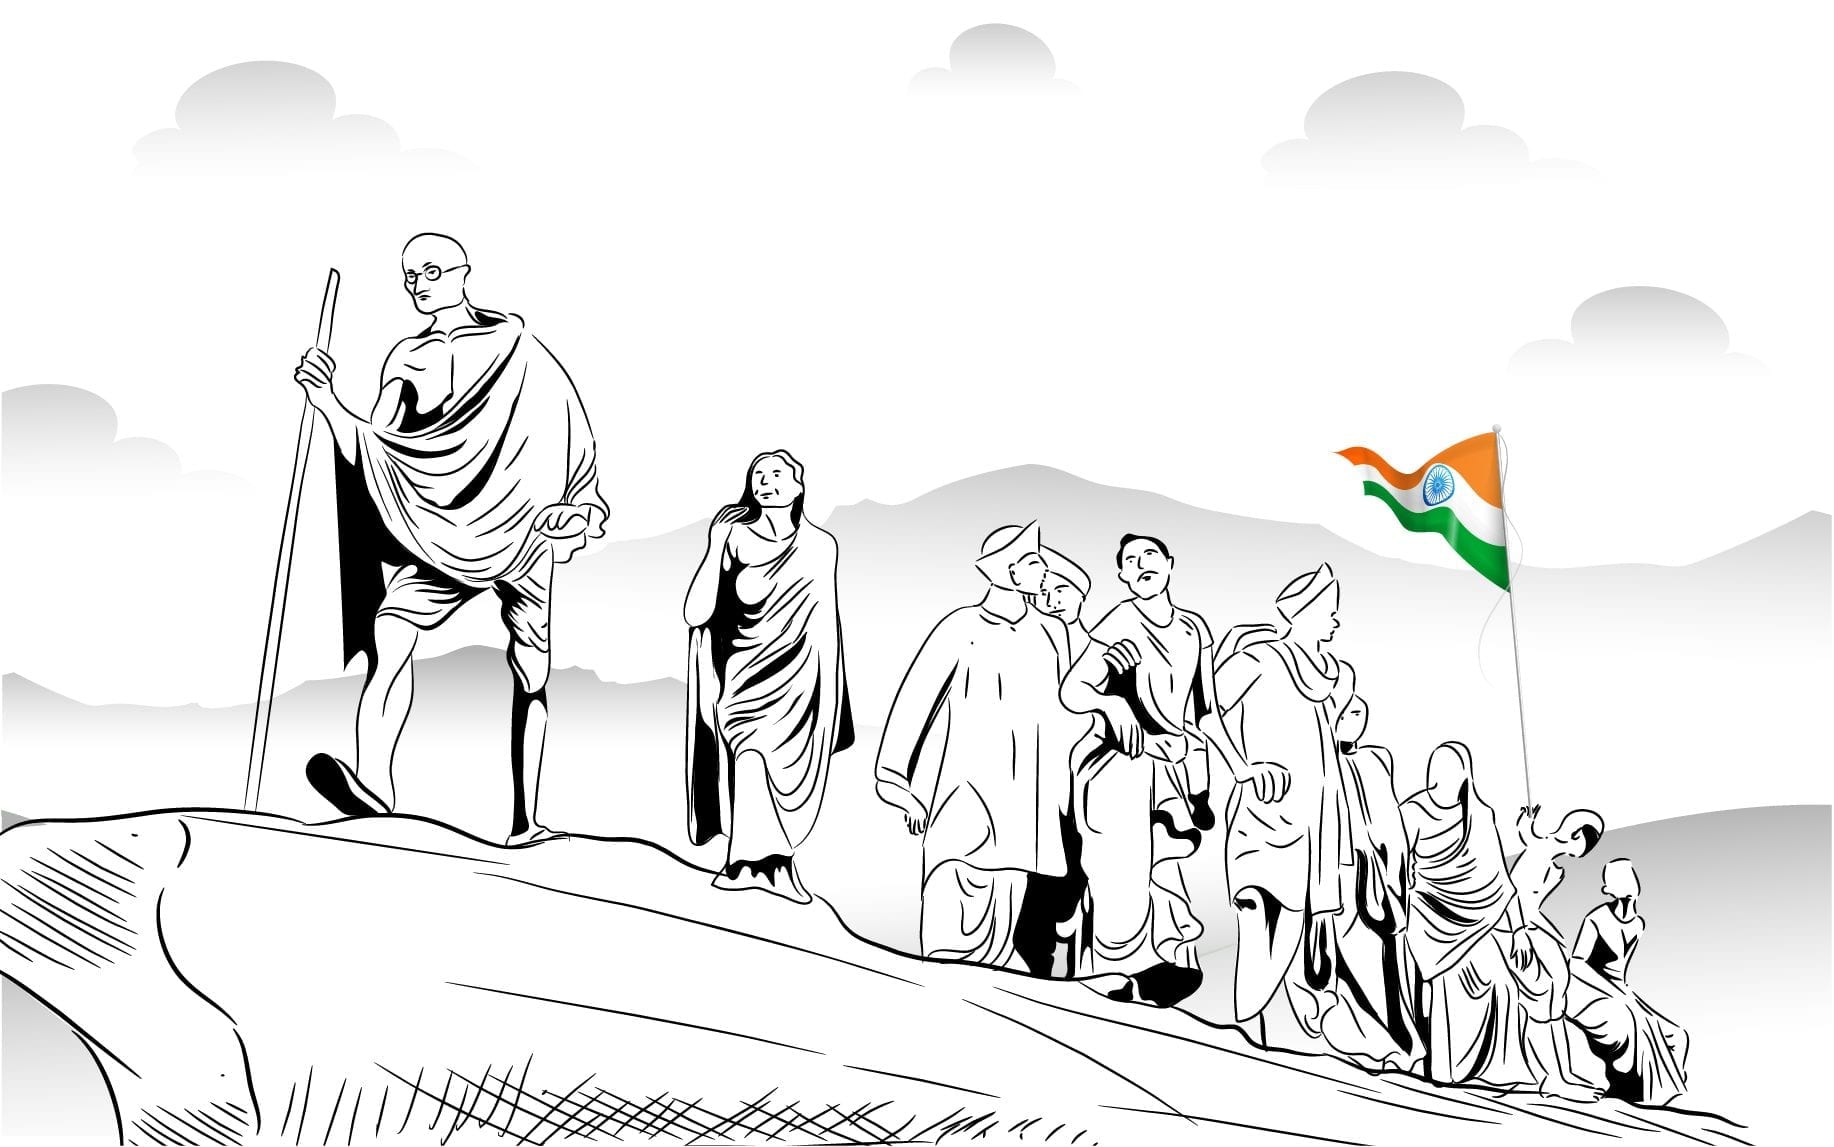 Hamara India (theme drawing) | Freedom drawing, Independence day drawing,  India poster